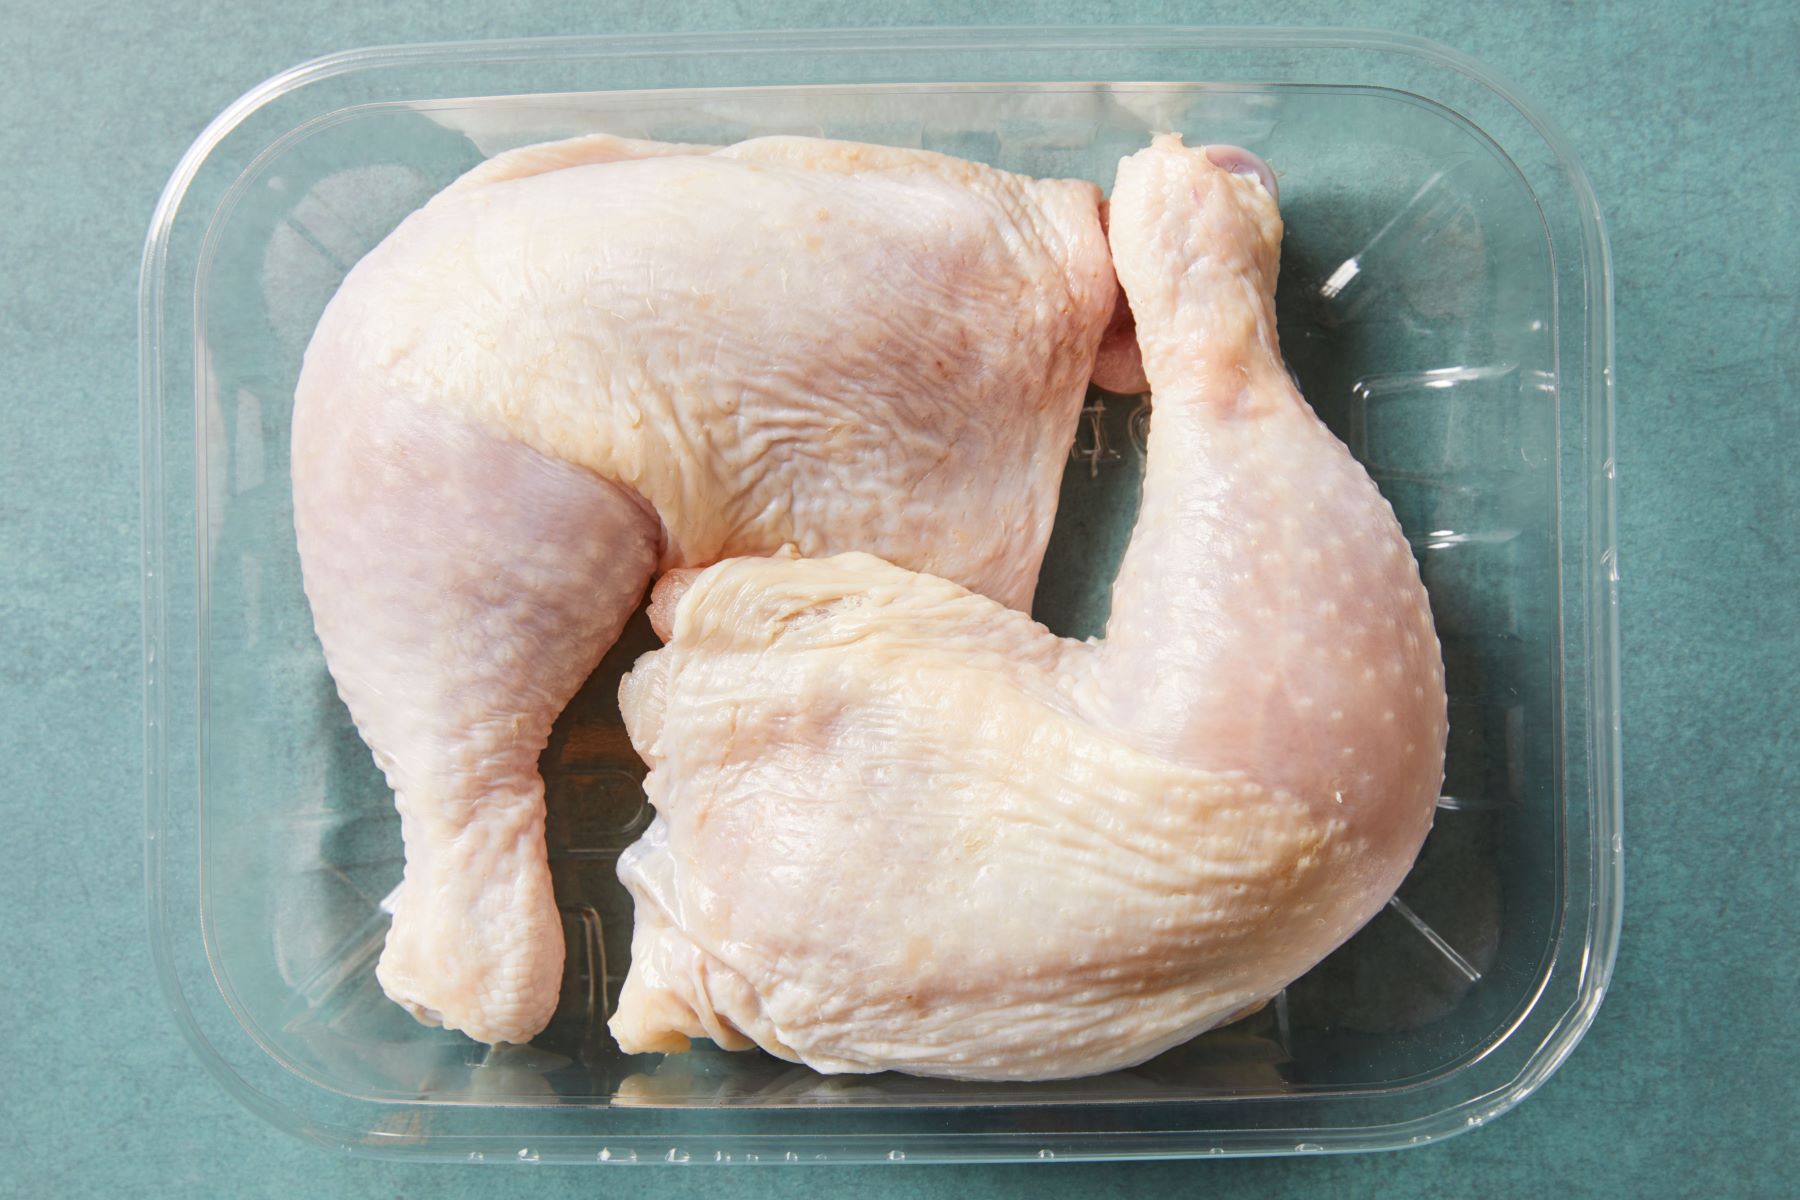 The Surprising Truth About Eating Raw Chicken Past The 'Sell By' Date!